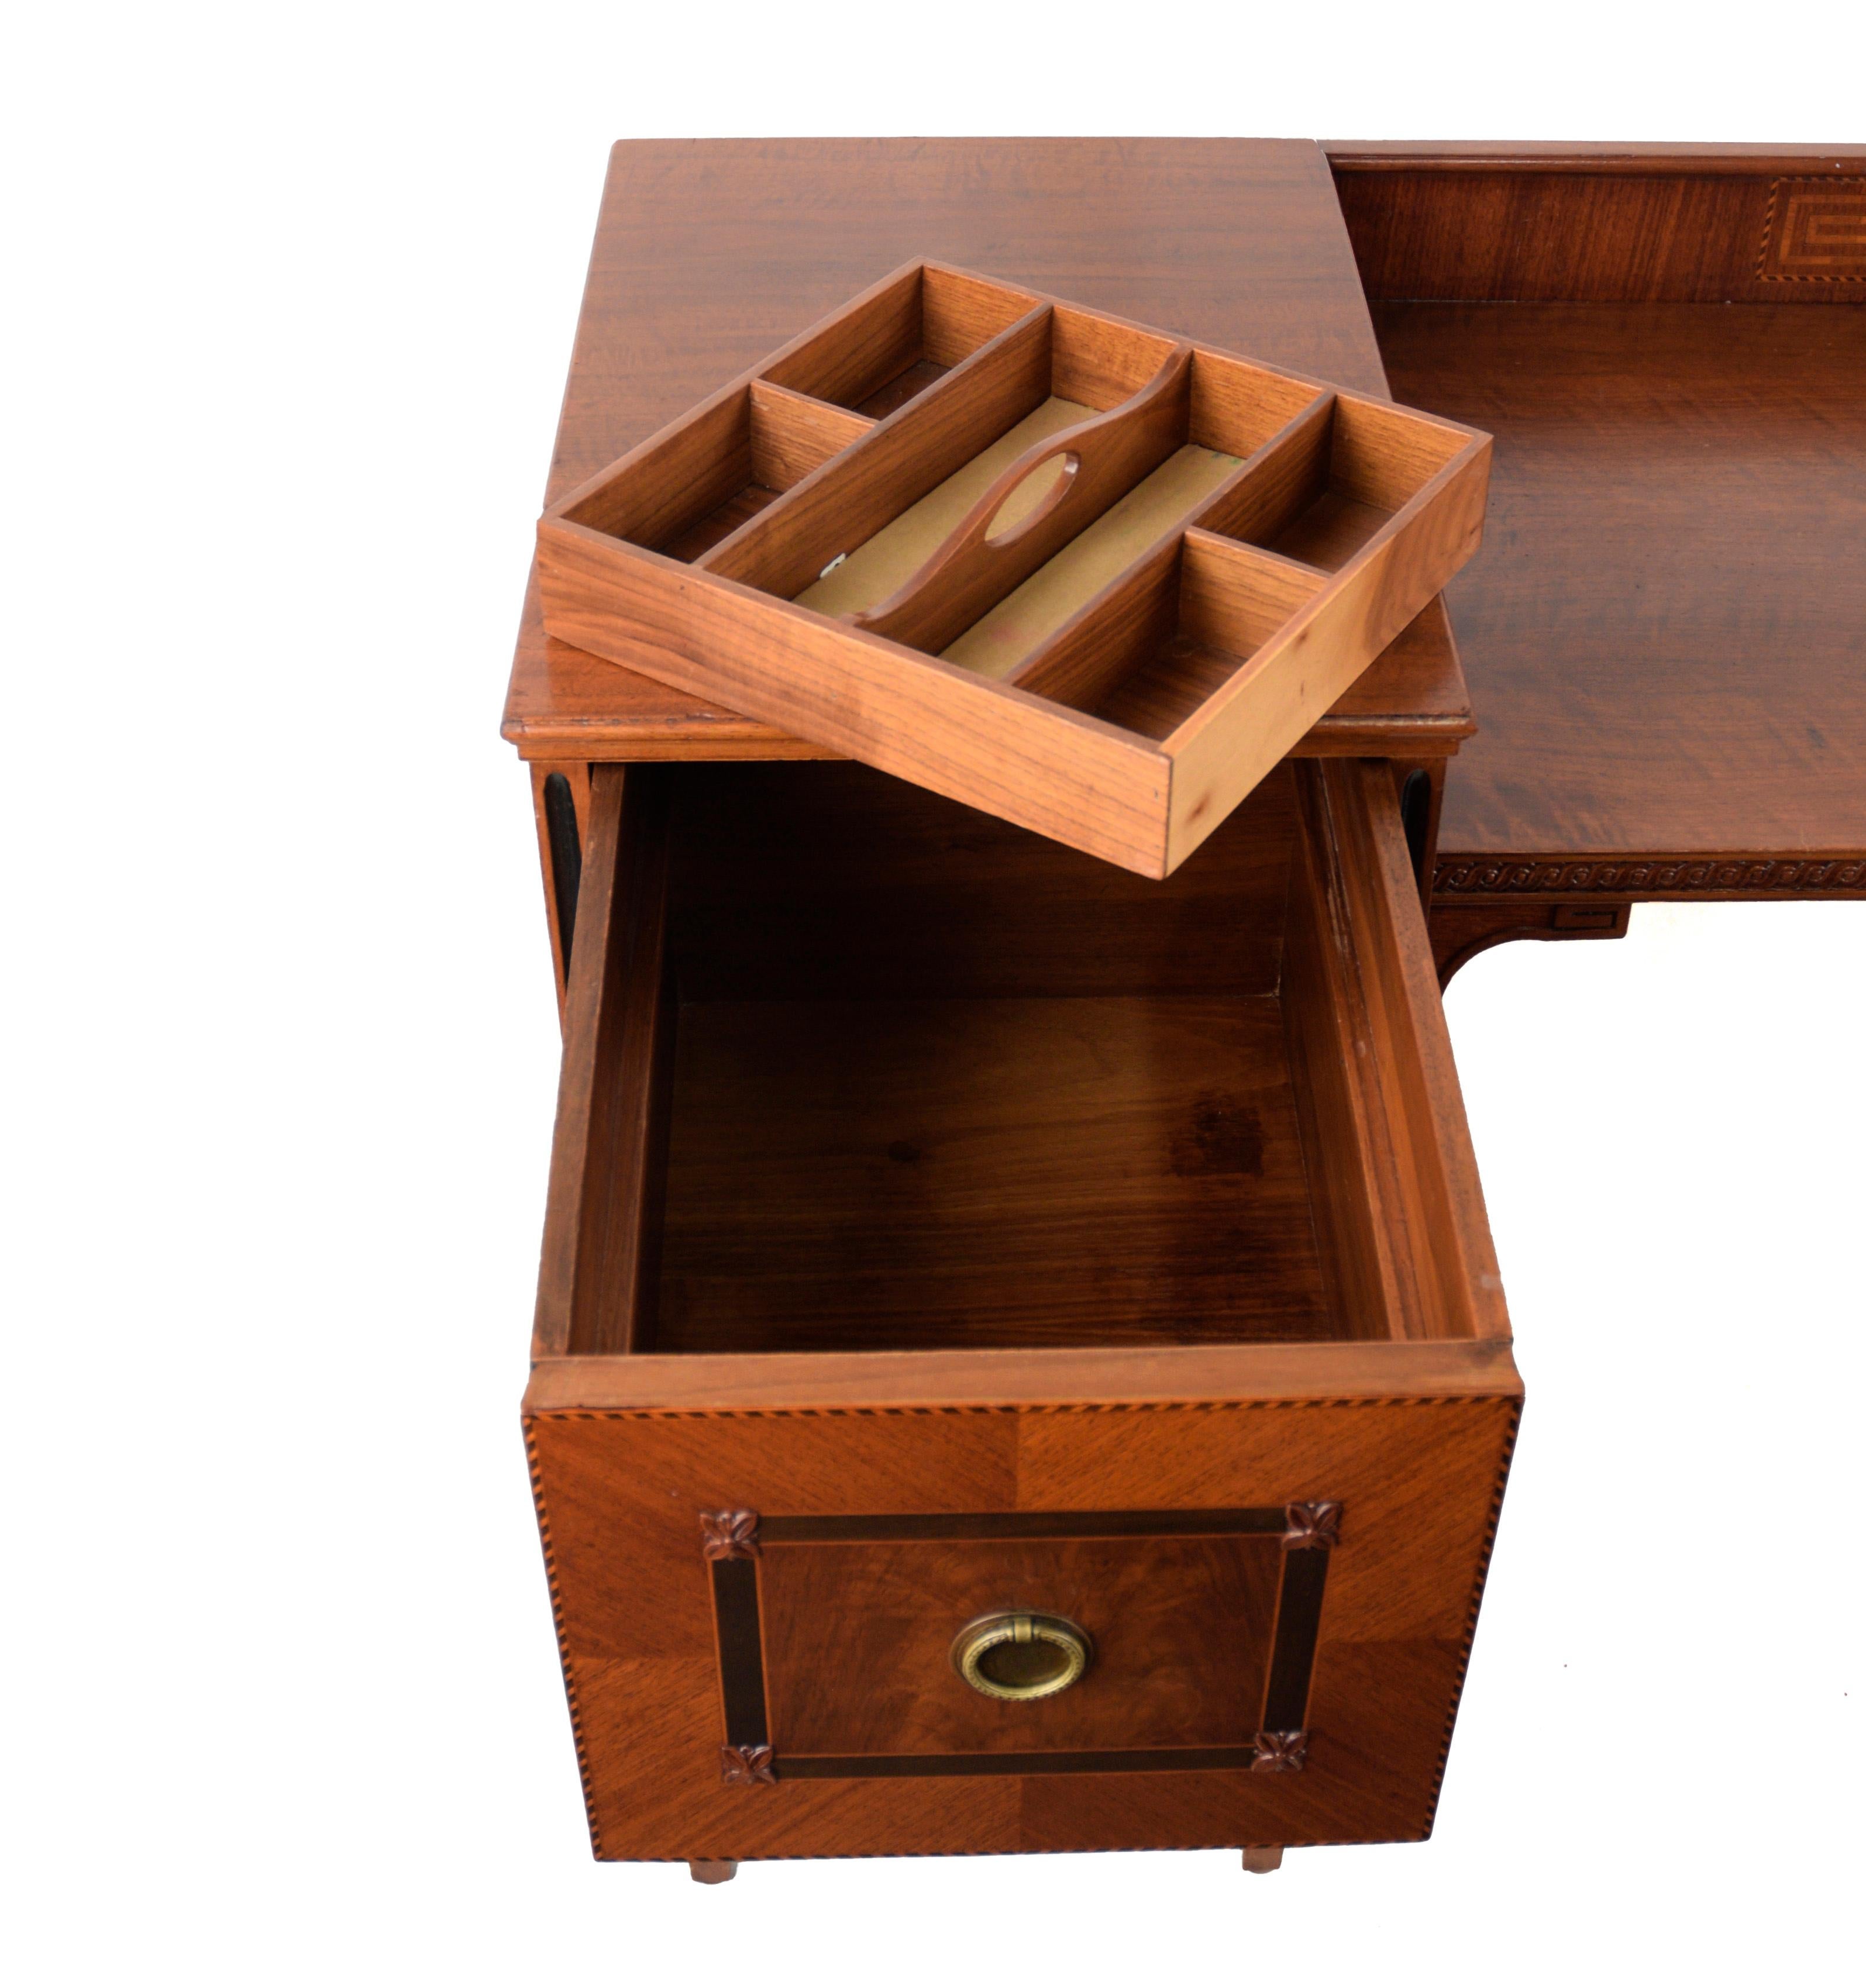 Hand-Crafted 4-Piece Federal Bedroom Set: Vanity, End Table, Dresser, Chest of Drawers For Sale